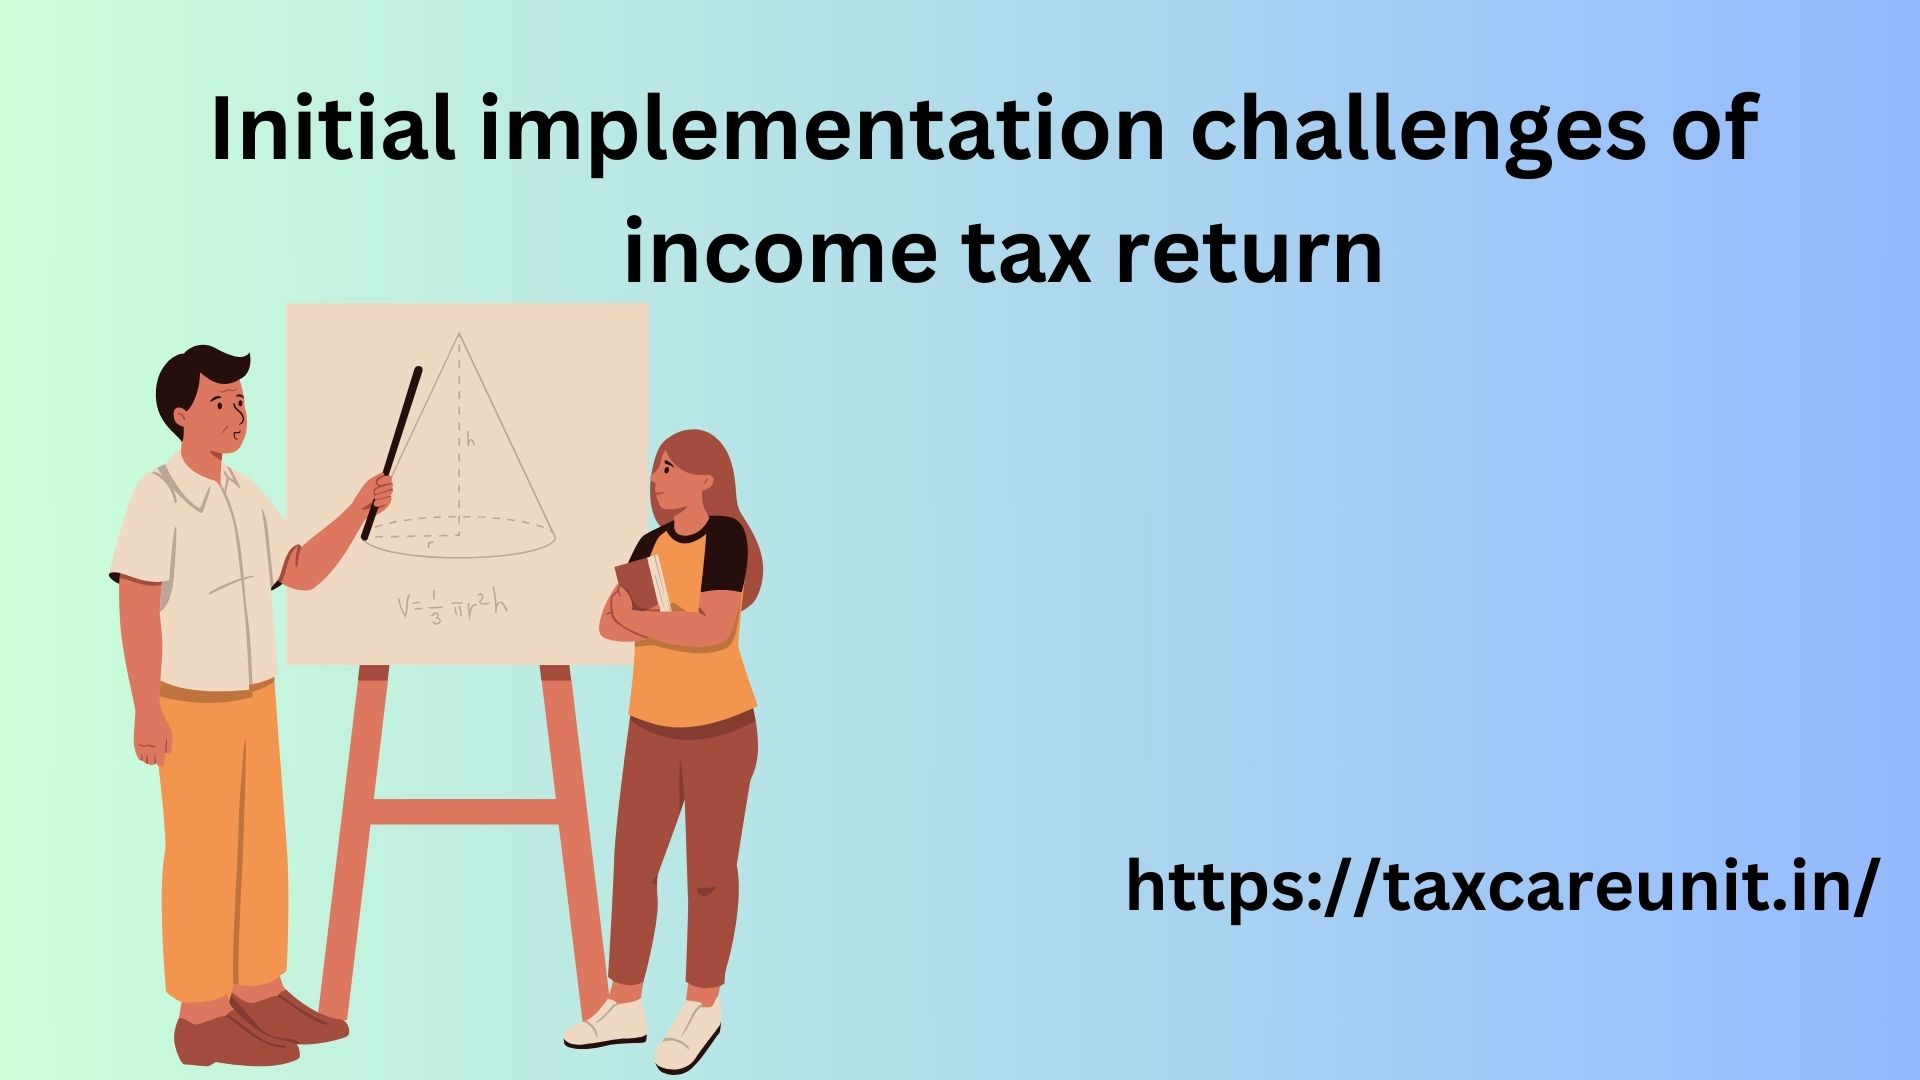 Initial implementation challenges of income tax return